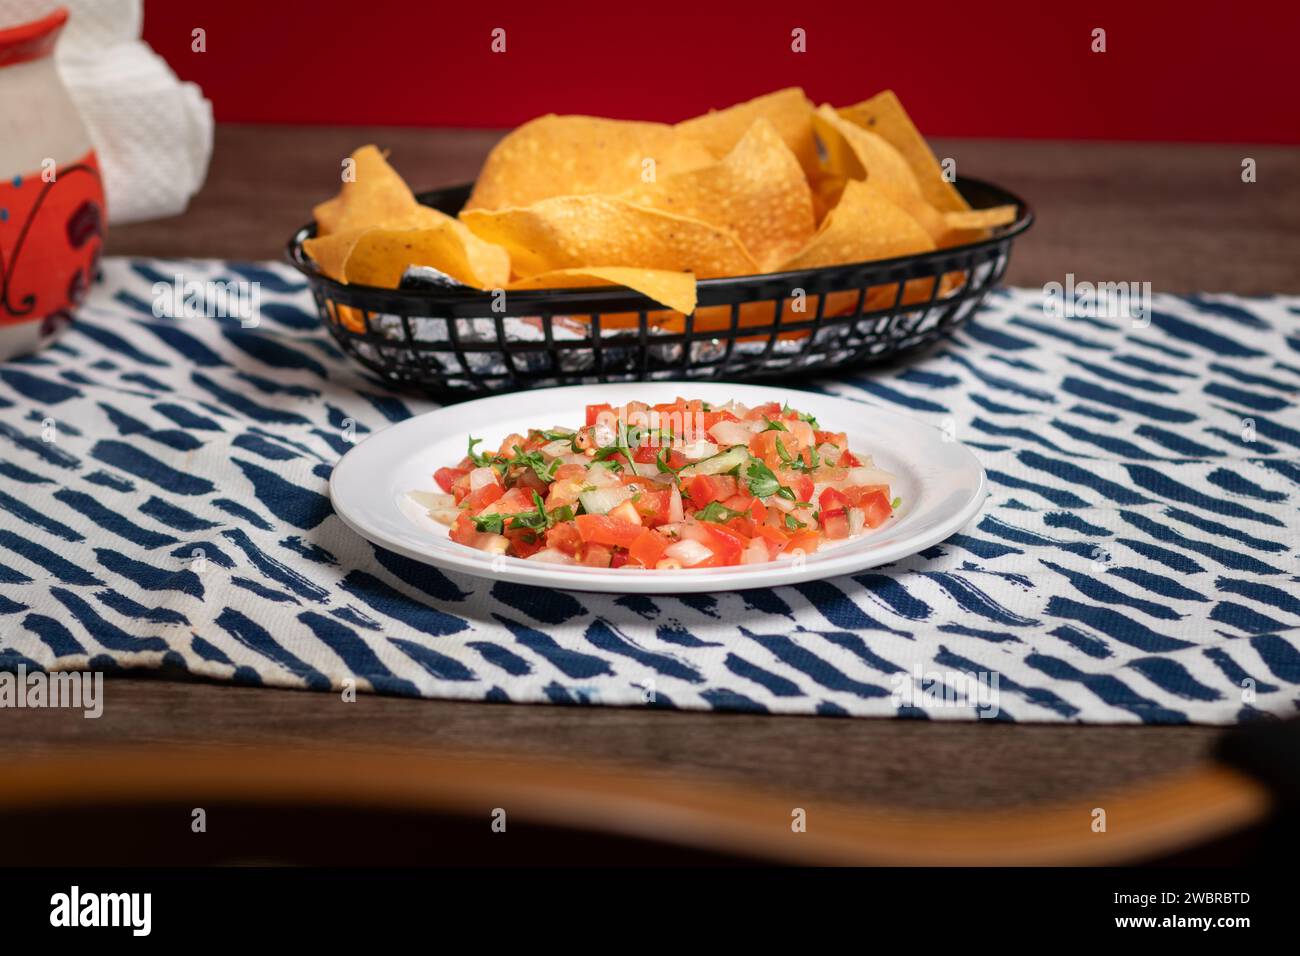 Pico de gallo dip with chips at a Mexican Restaurant Stock Photo